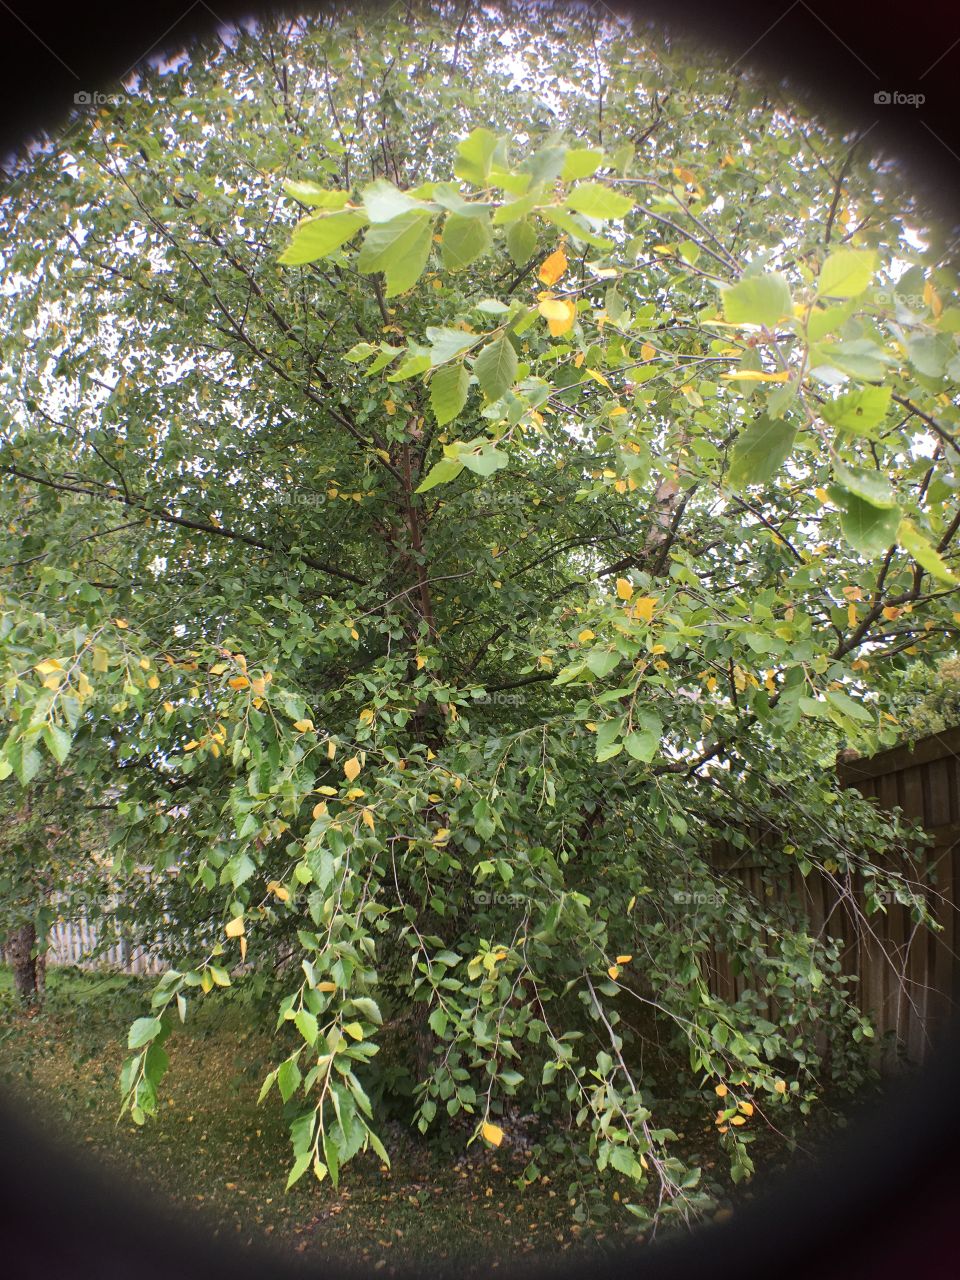 Fish eye lens of a yellow and green tree 